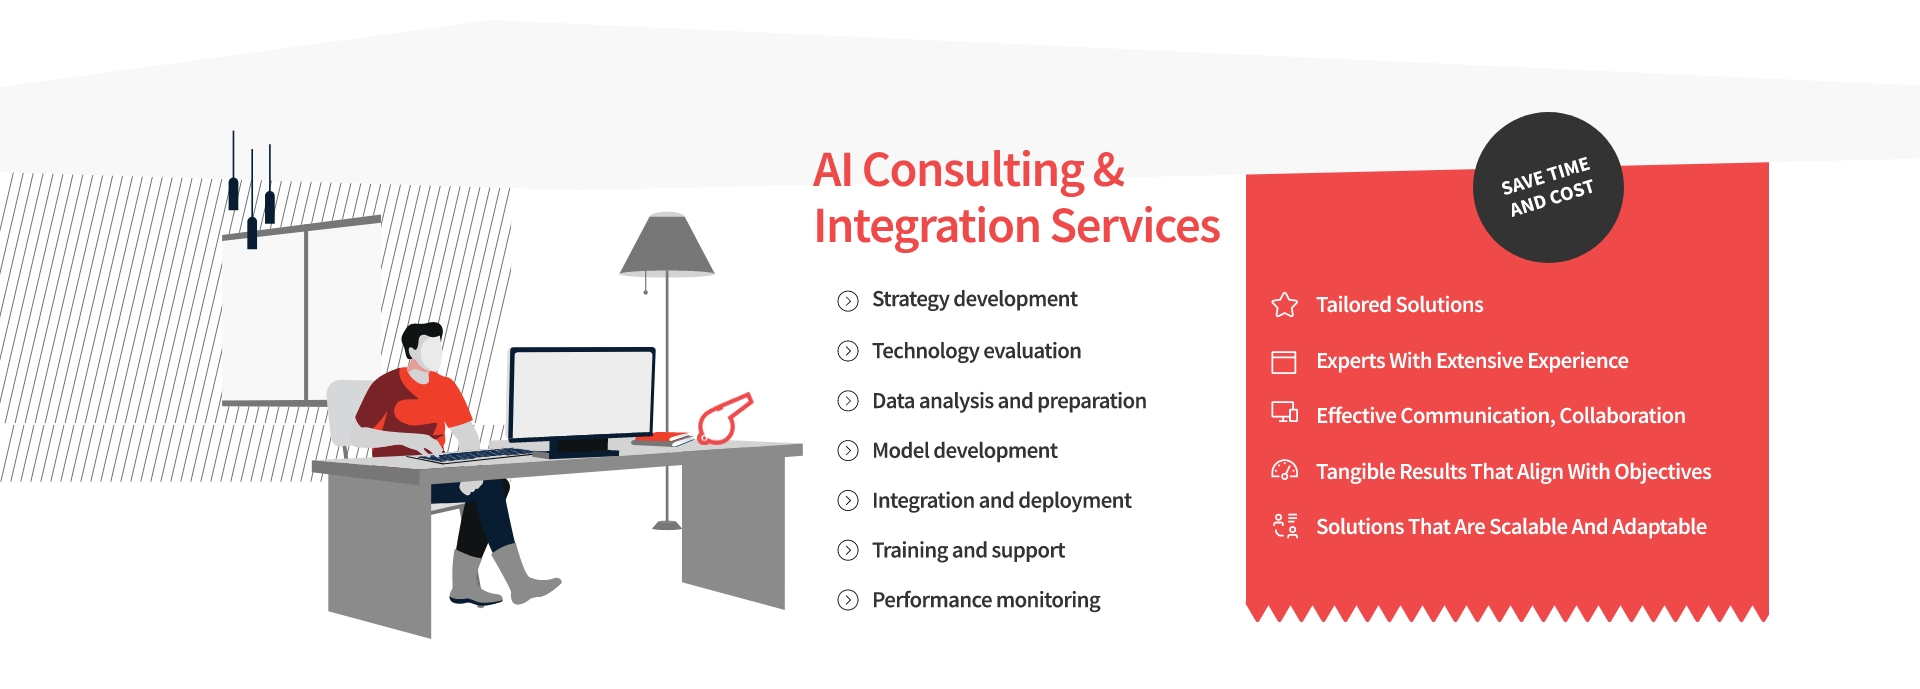 Artificial Intelligence Consulting & Integration Services - ColorWhistle